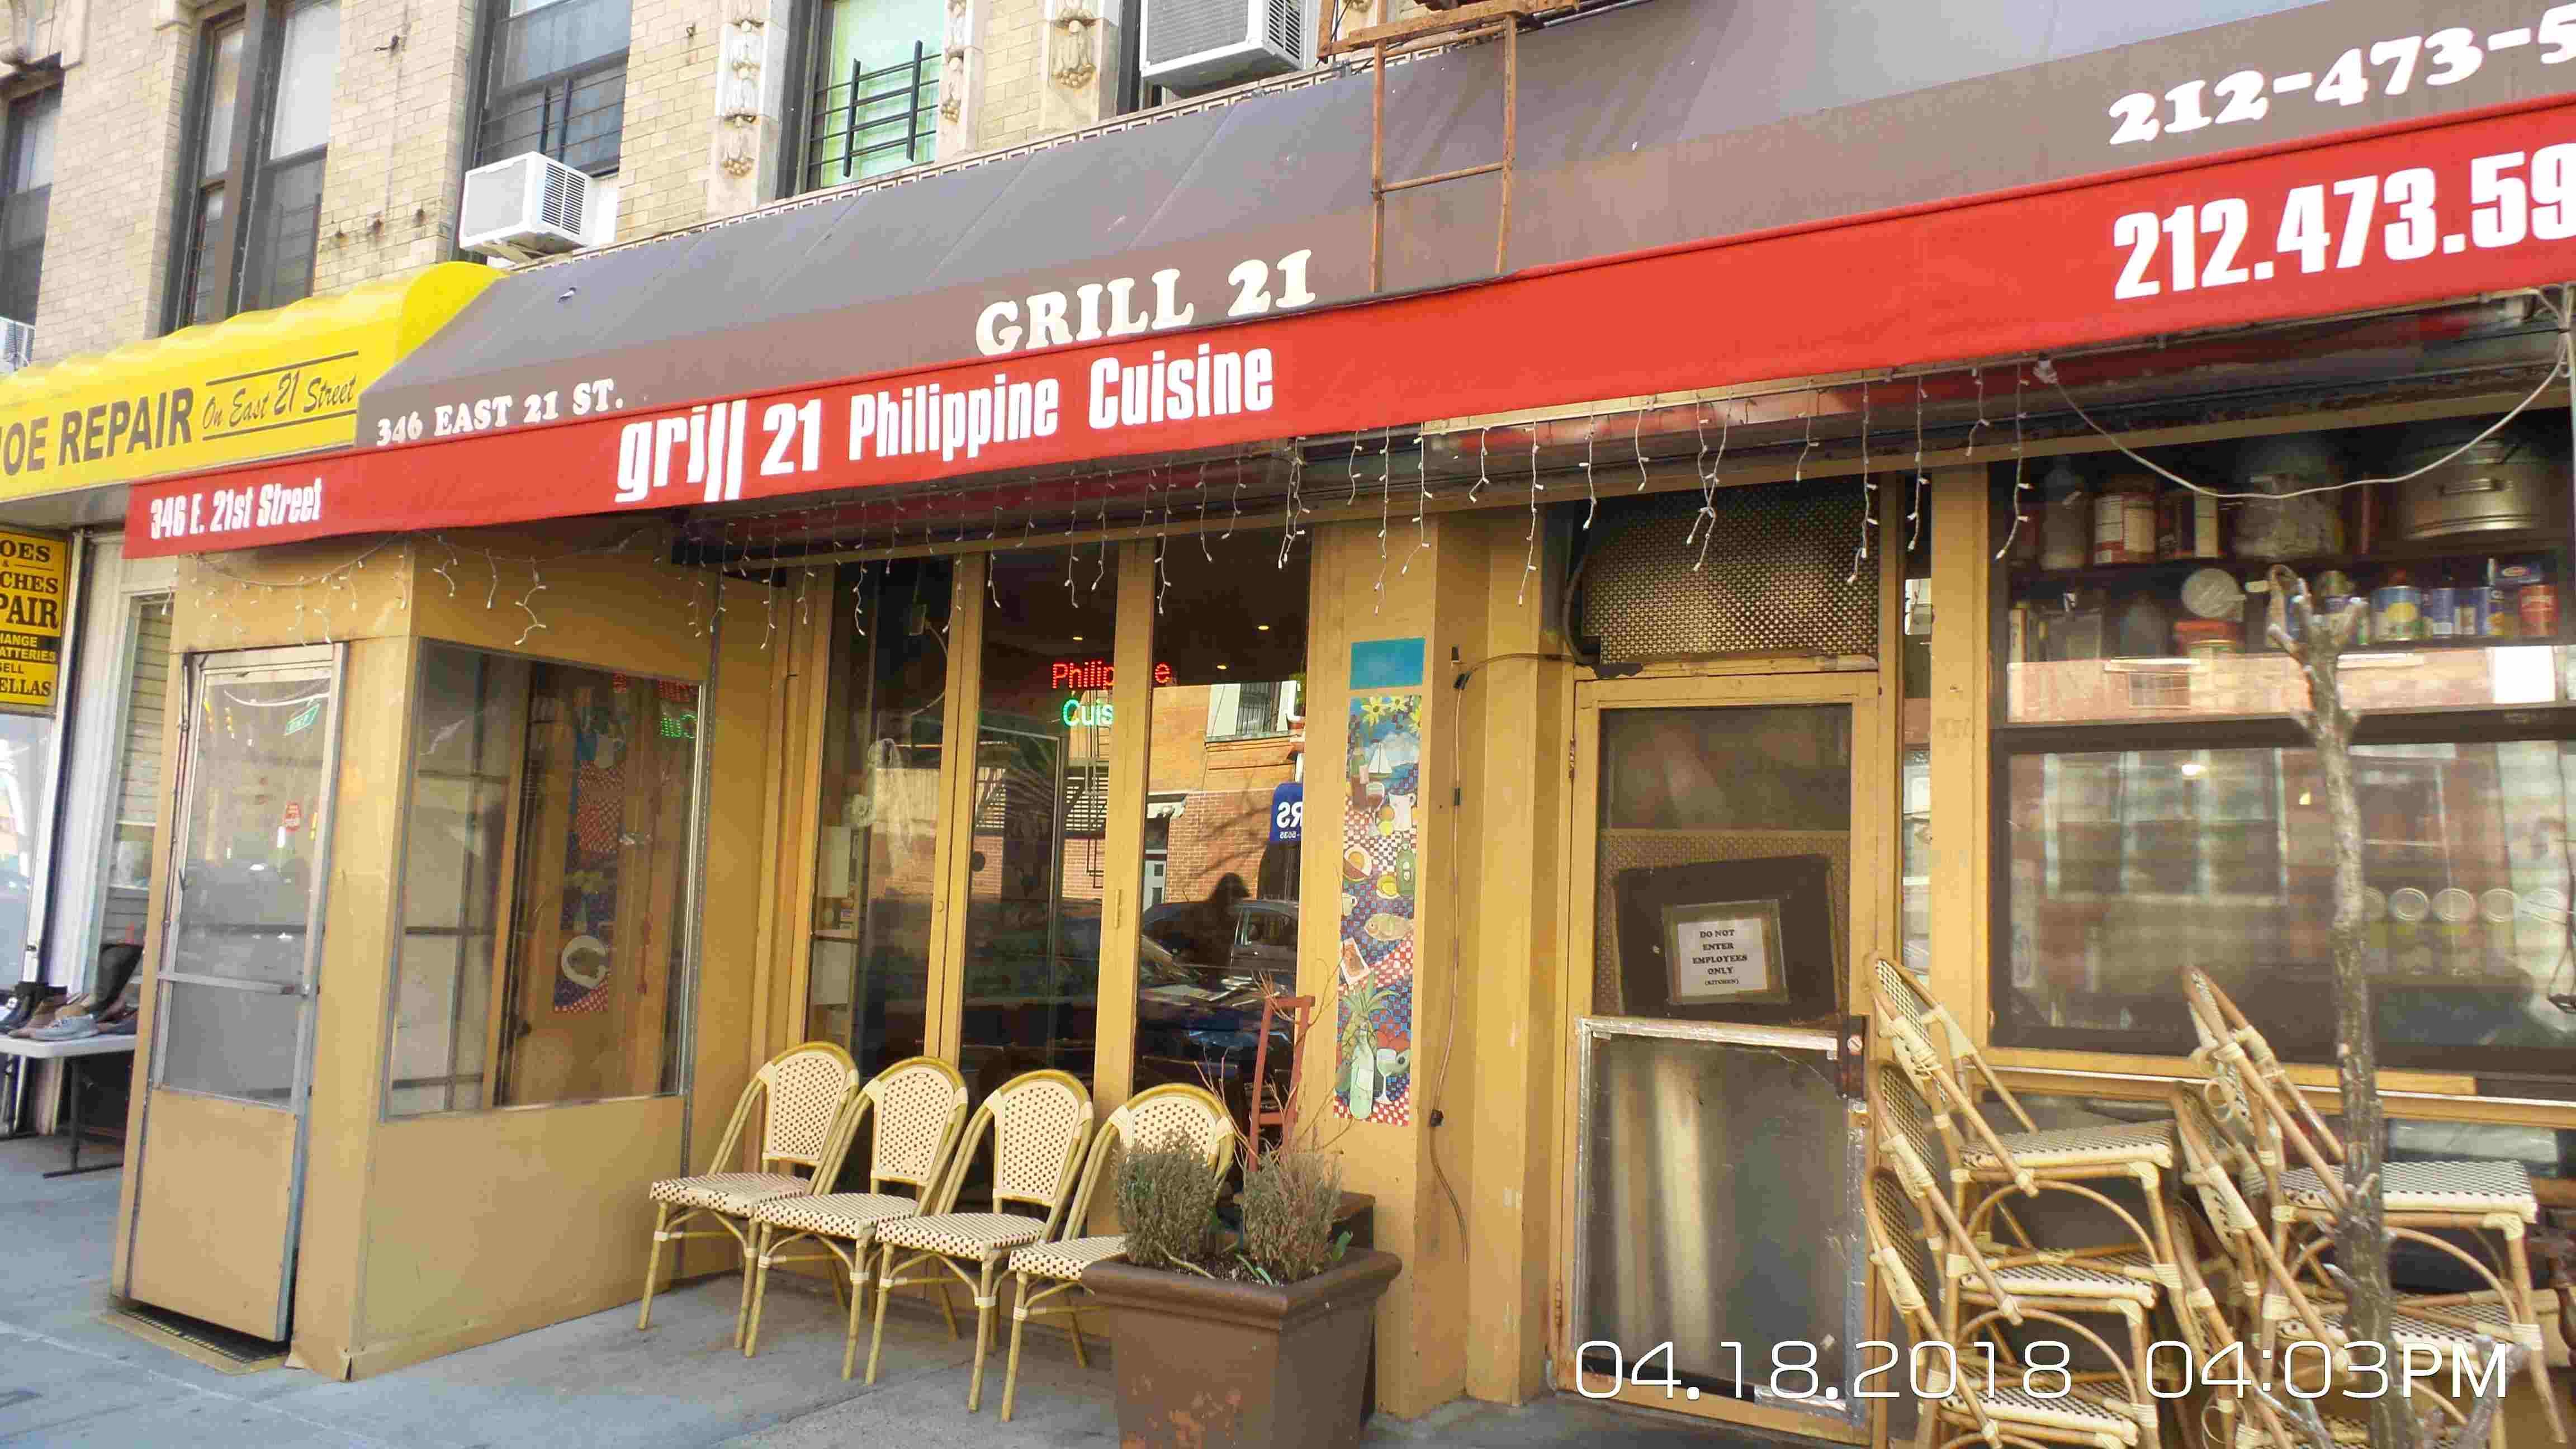 STILL STANDING. The facade of Filipino restaurant Grill 21 on 21st Street and 1st Avenue in Manhattan.